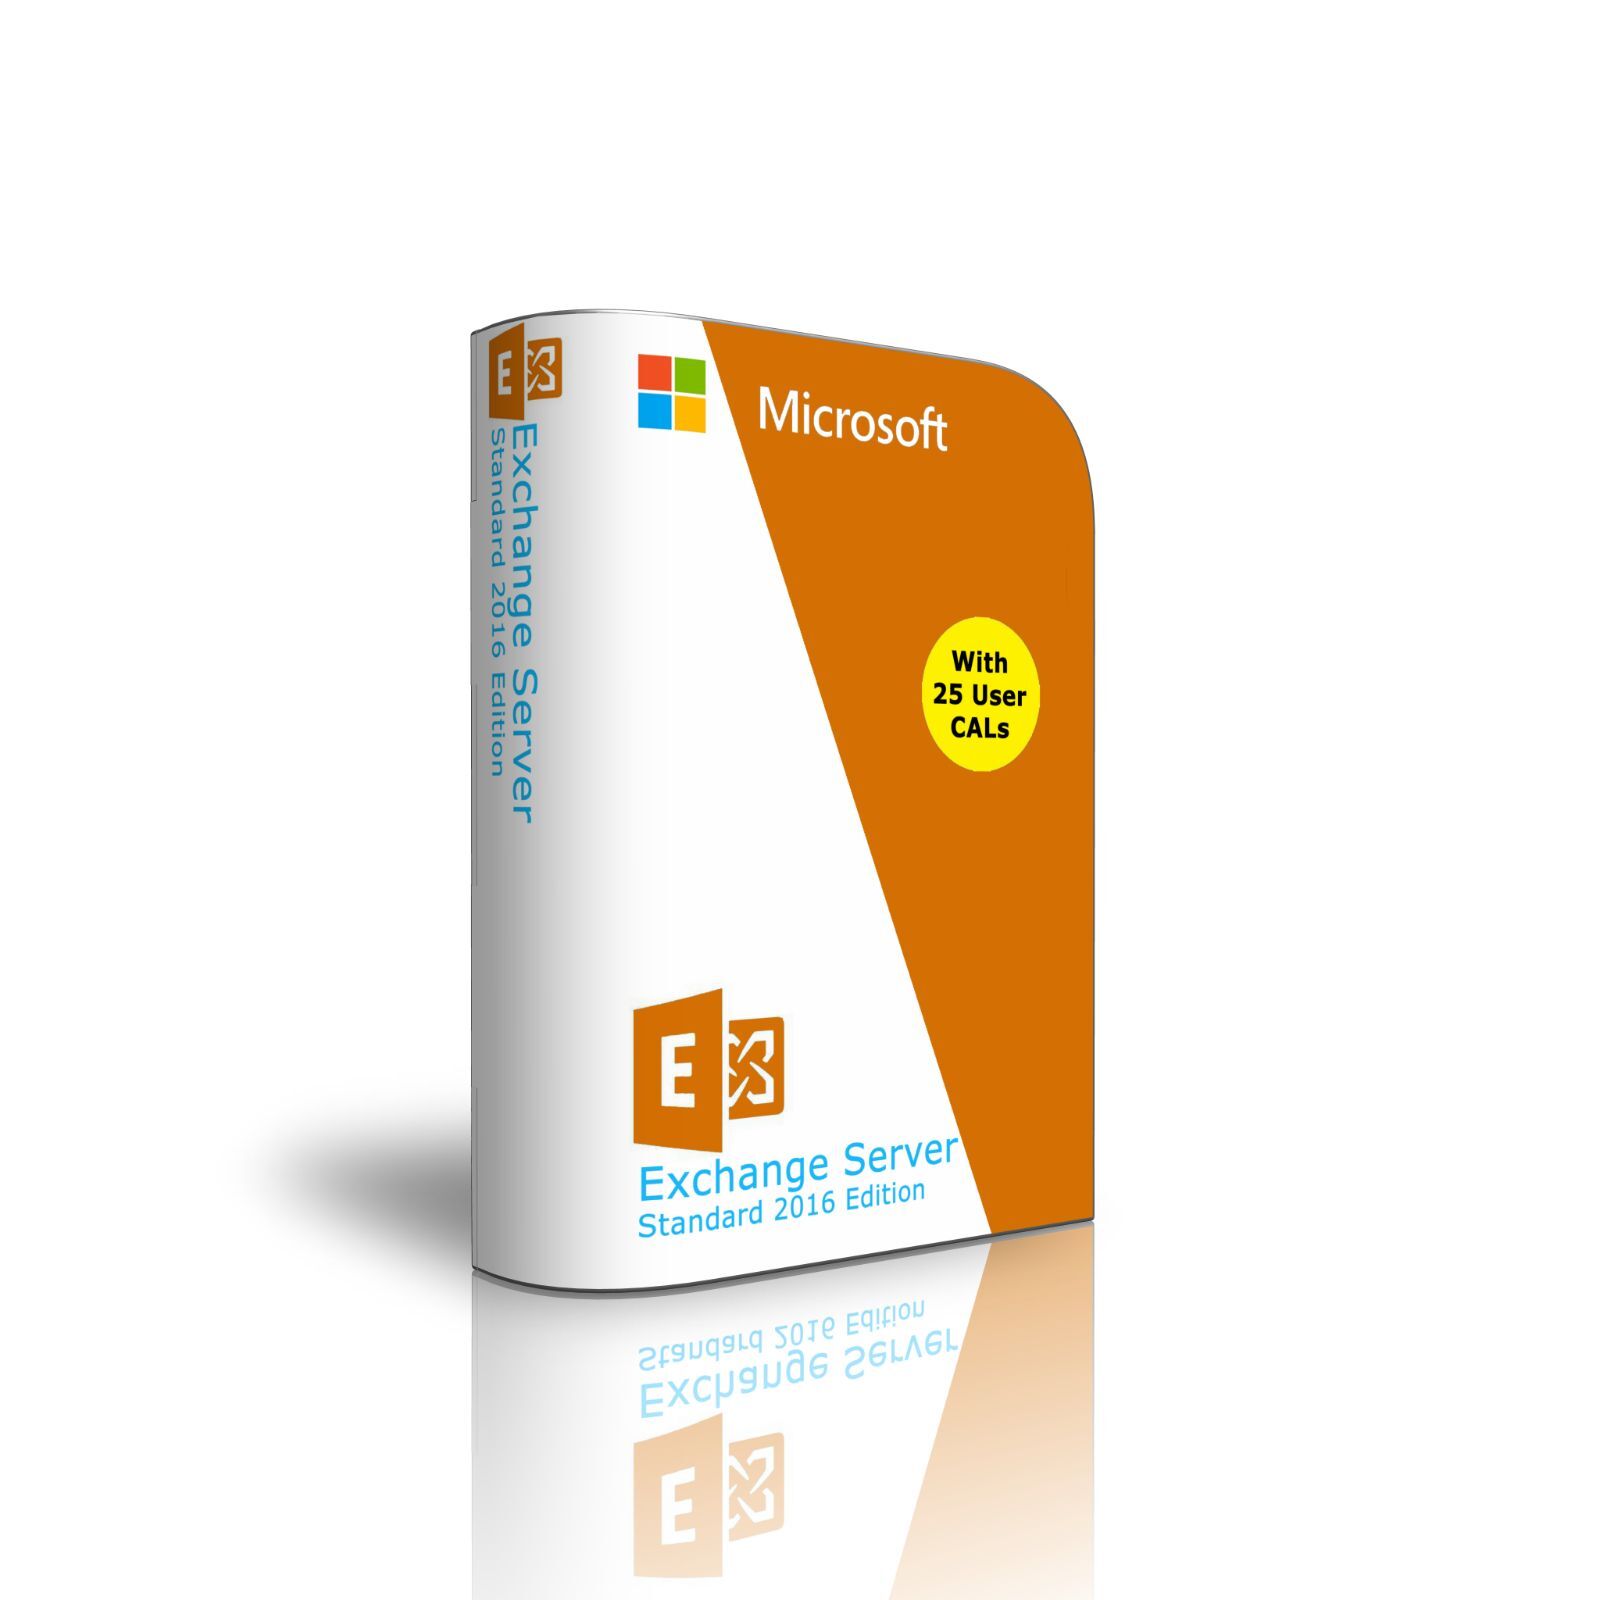 Exchange Server 2016 - Standard Edition 64 Bit Complete with 25 User CAL License